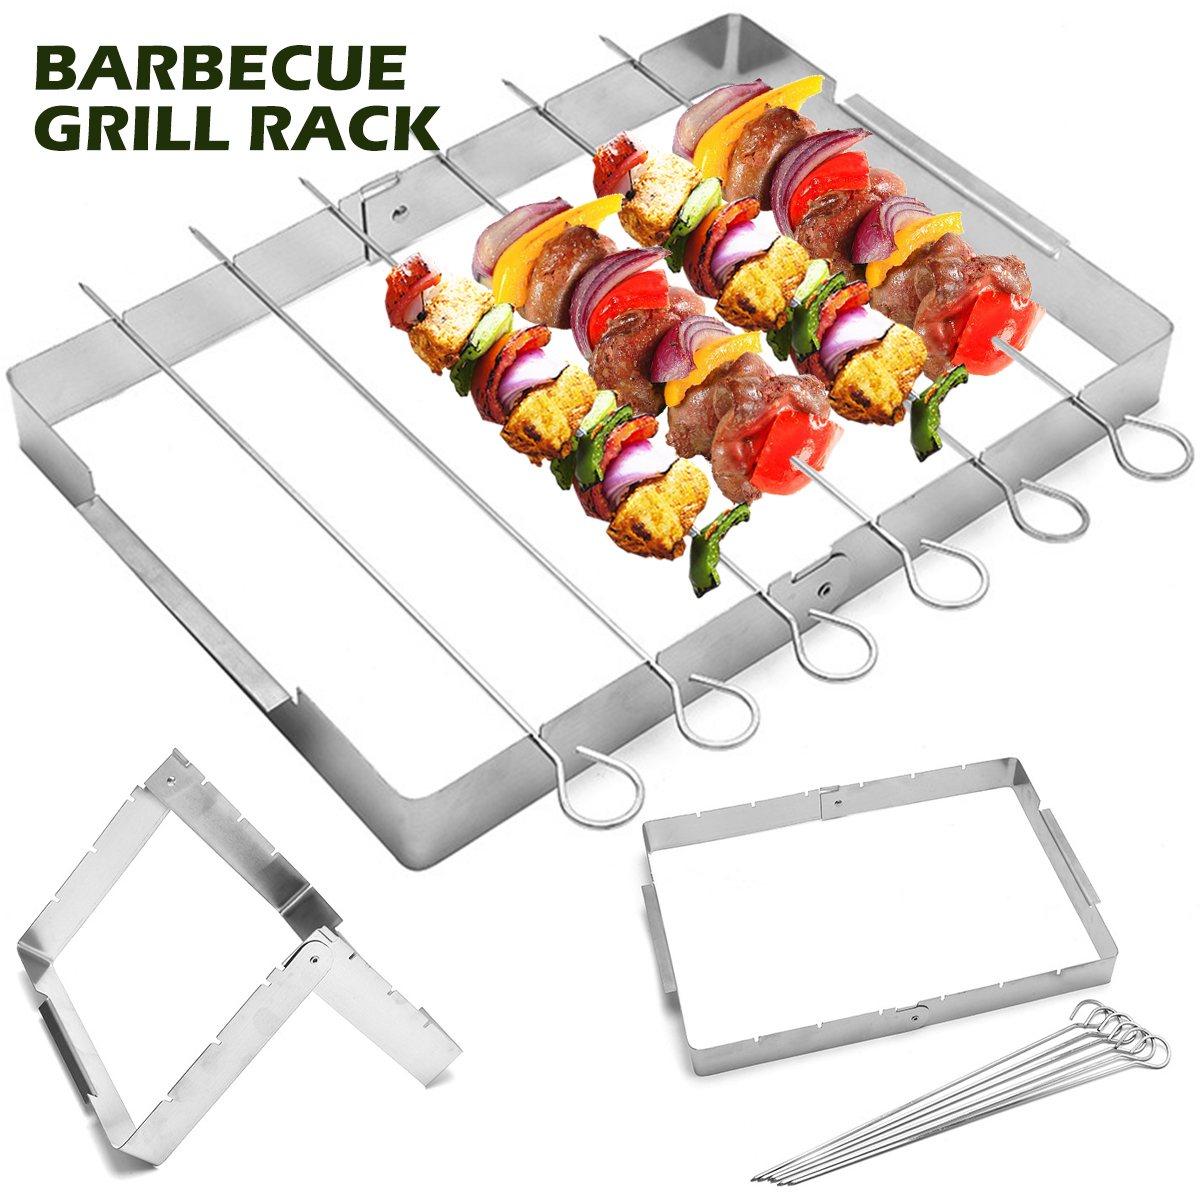 Barbecue Skewer Shish Kabob Set，Foldable Stainless Steel Grill Rack Set with 6 pcs Skewers for Party and Home - image 1 of 8